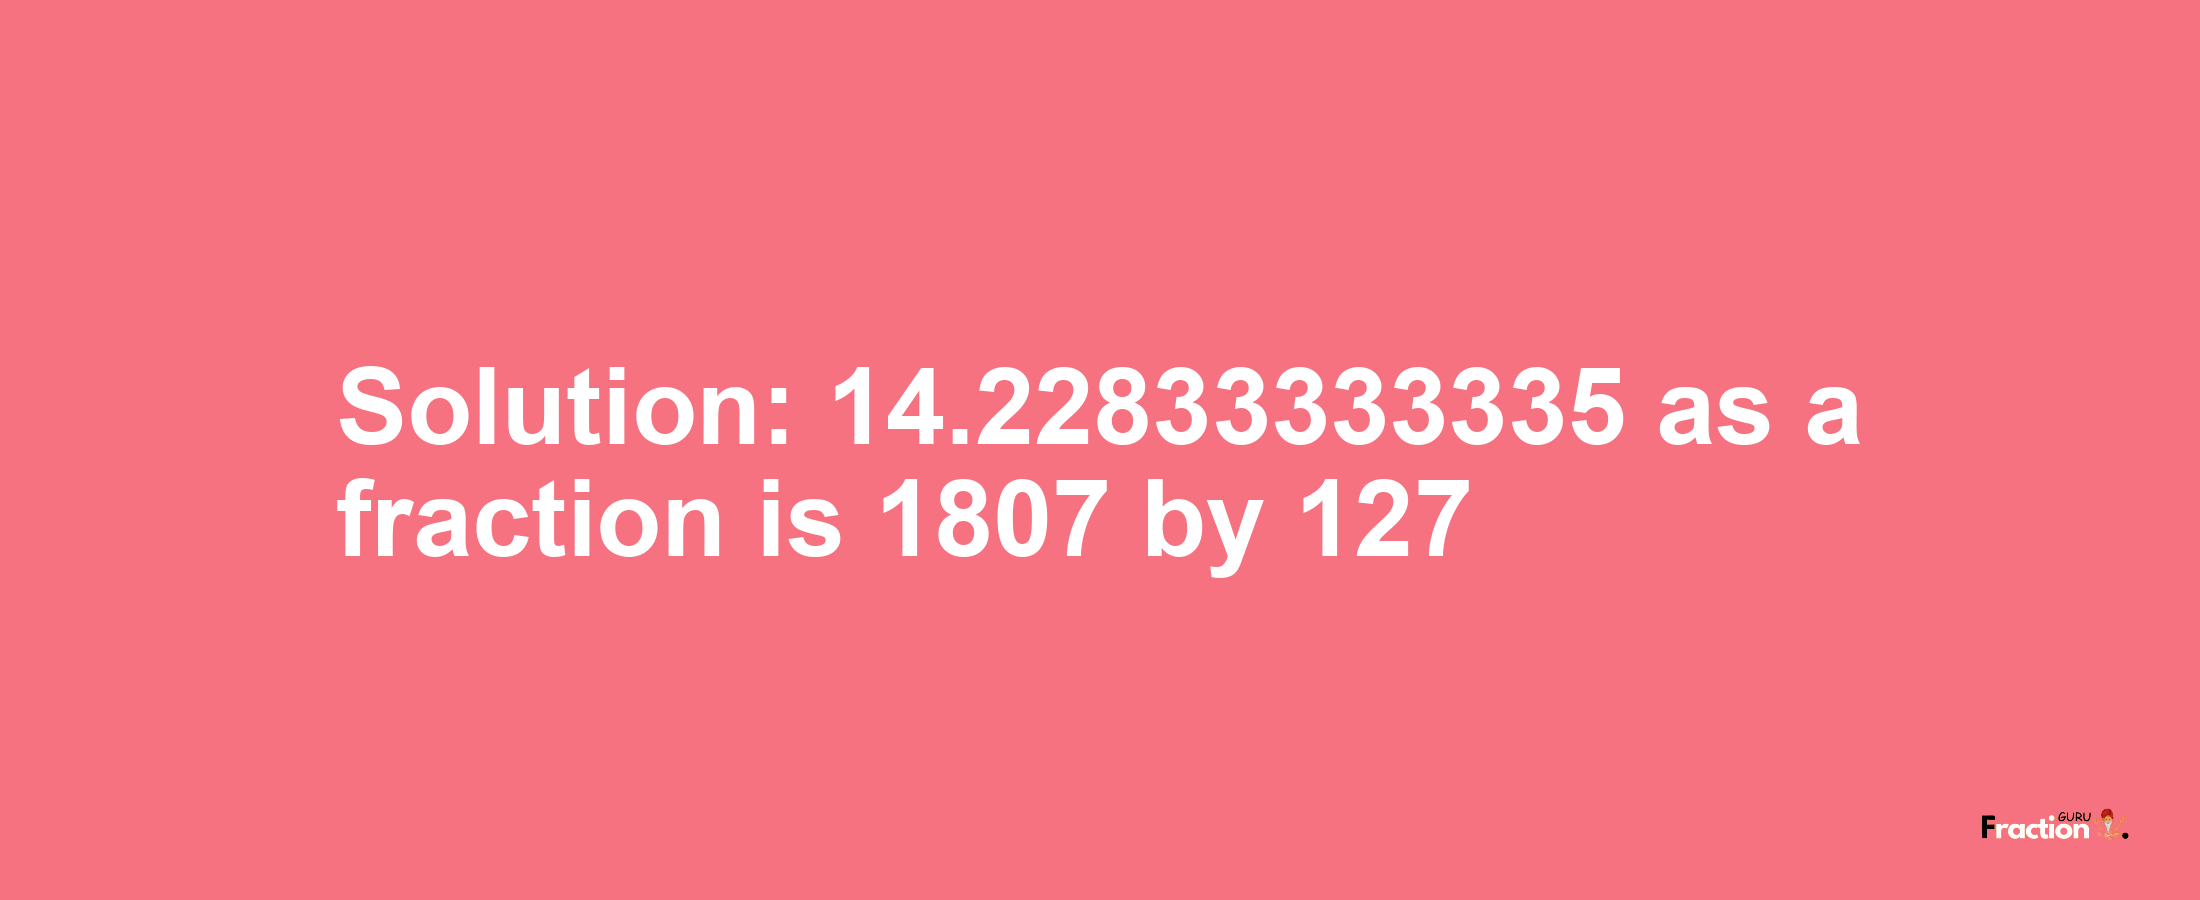 Solution:14.22833333335 as a fraction is 1807/127